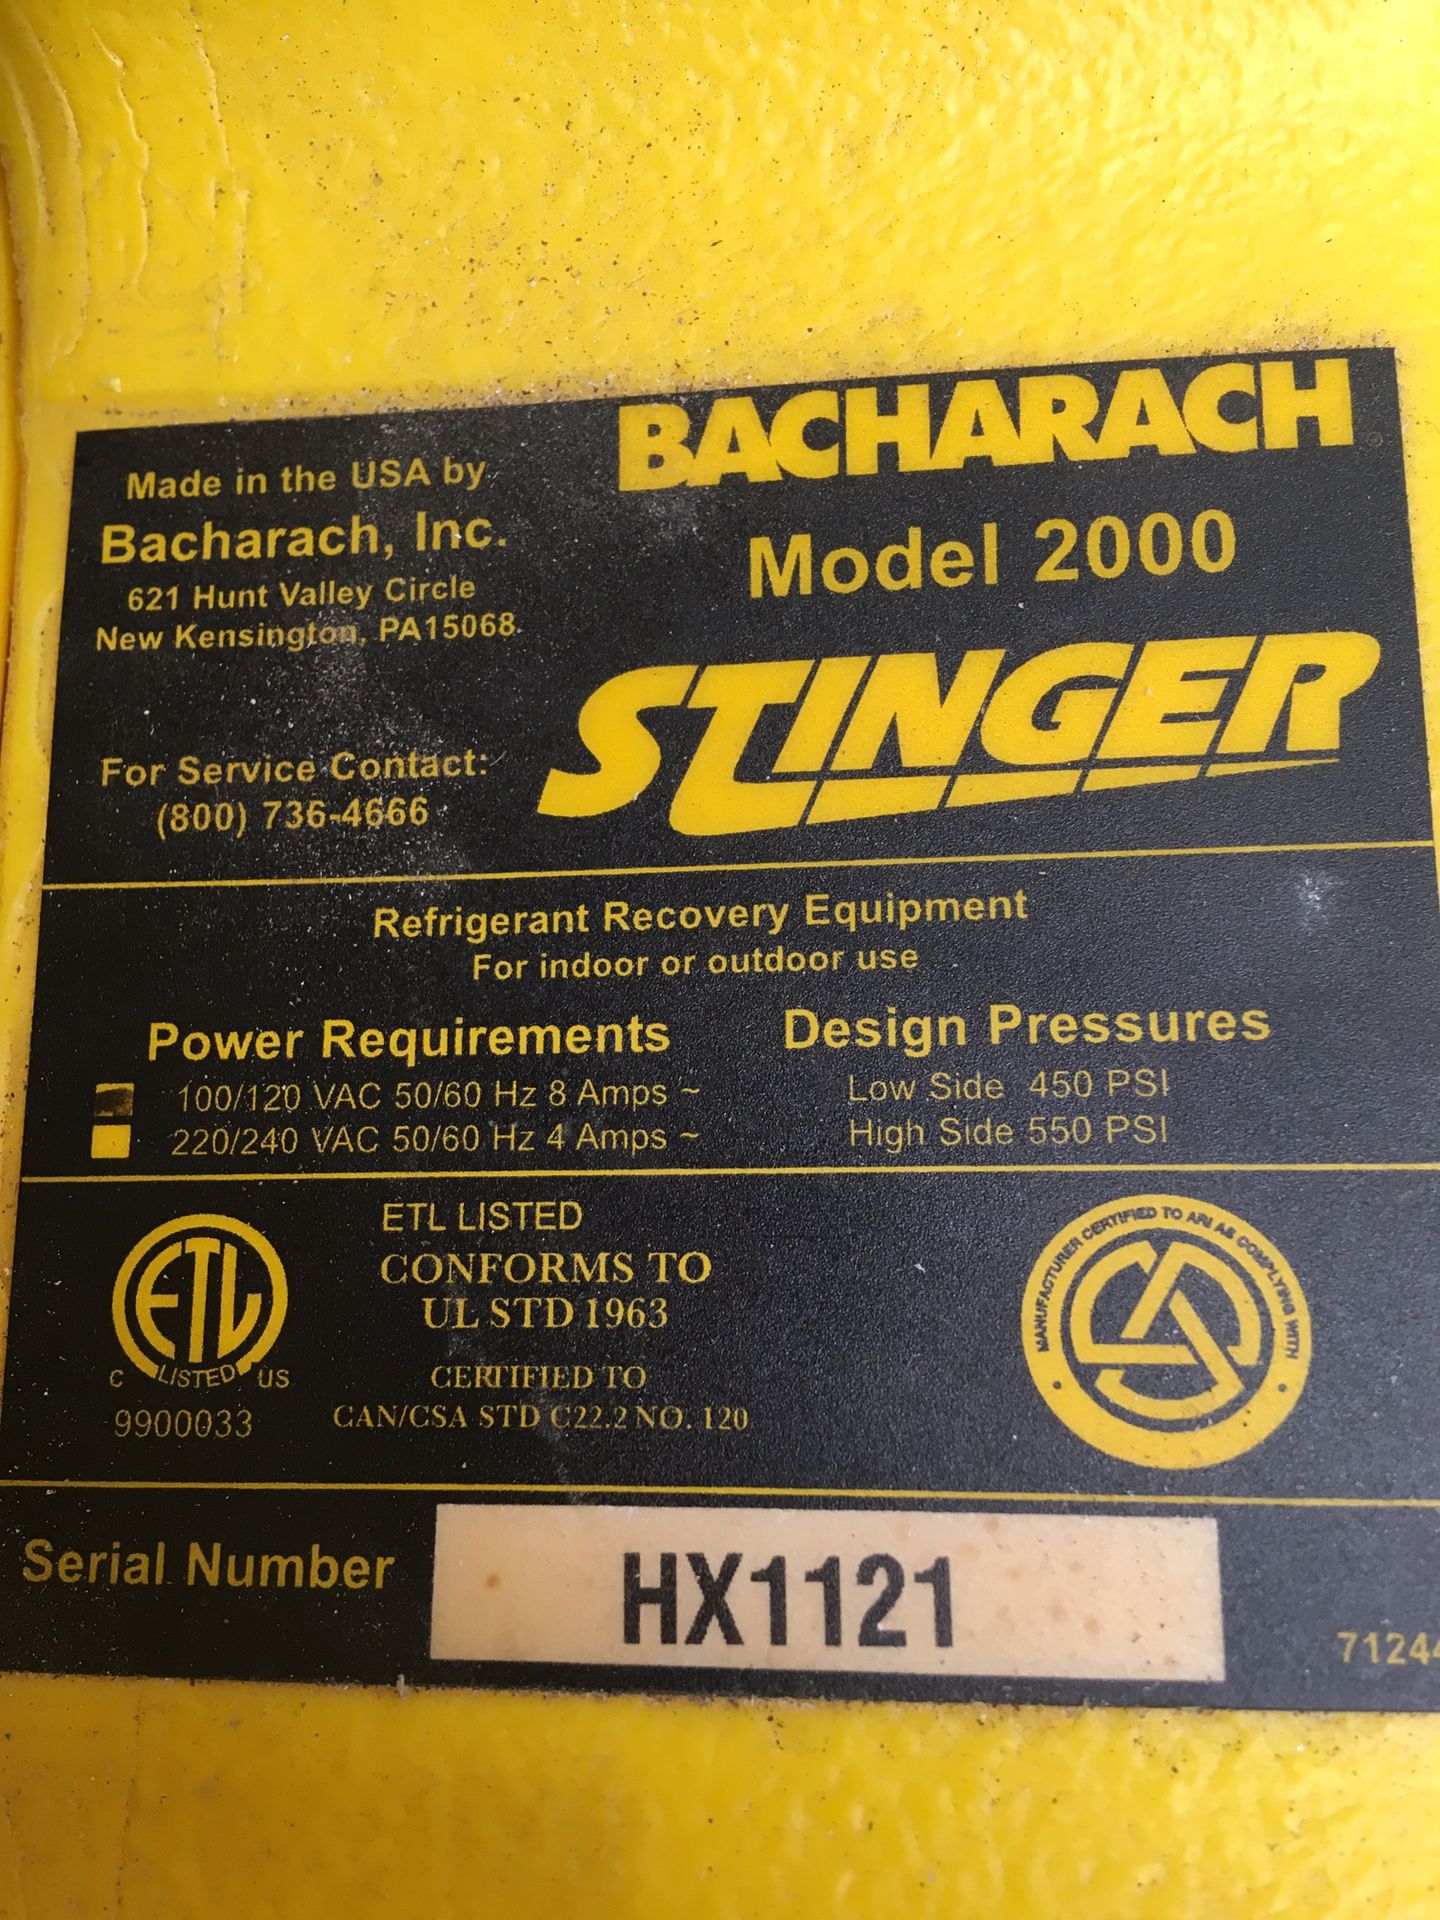 Bacharach model 2000 stinger Freon recovery system about 1 year old only used 4 times